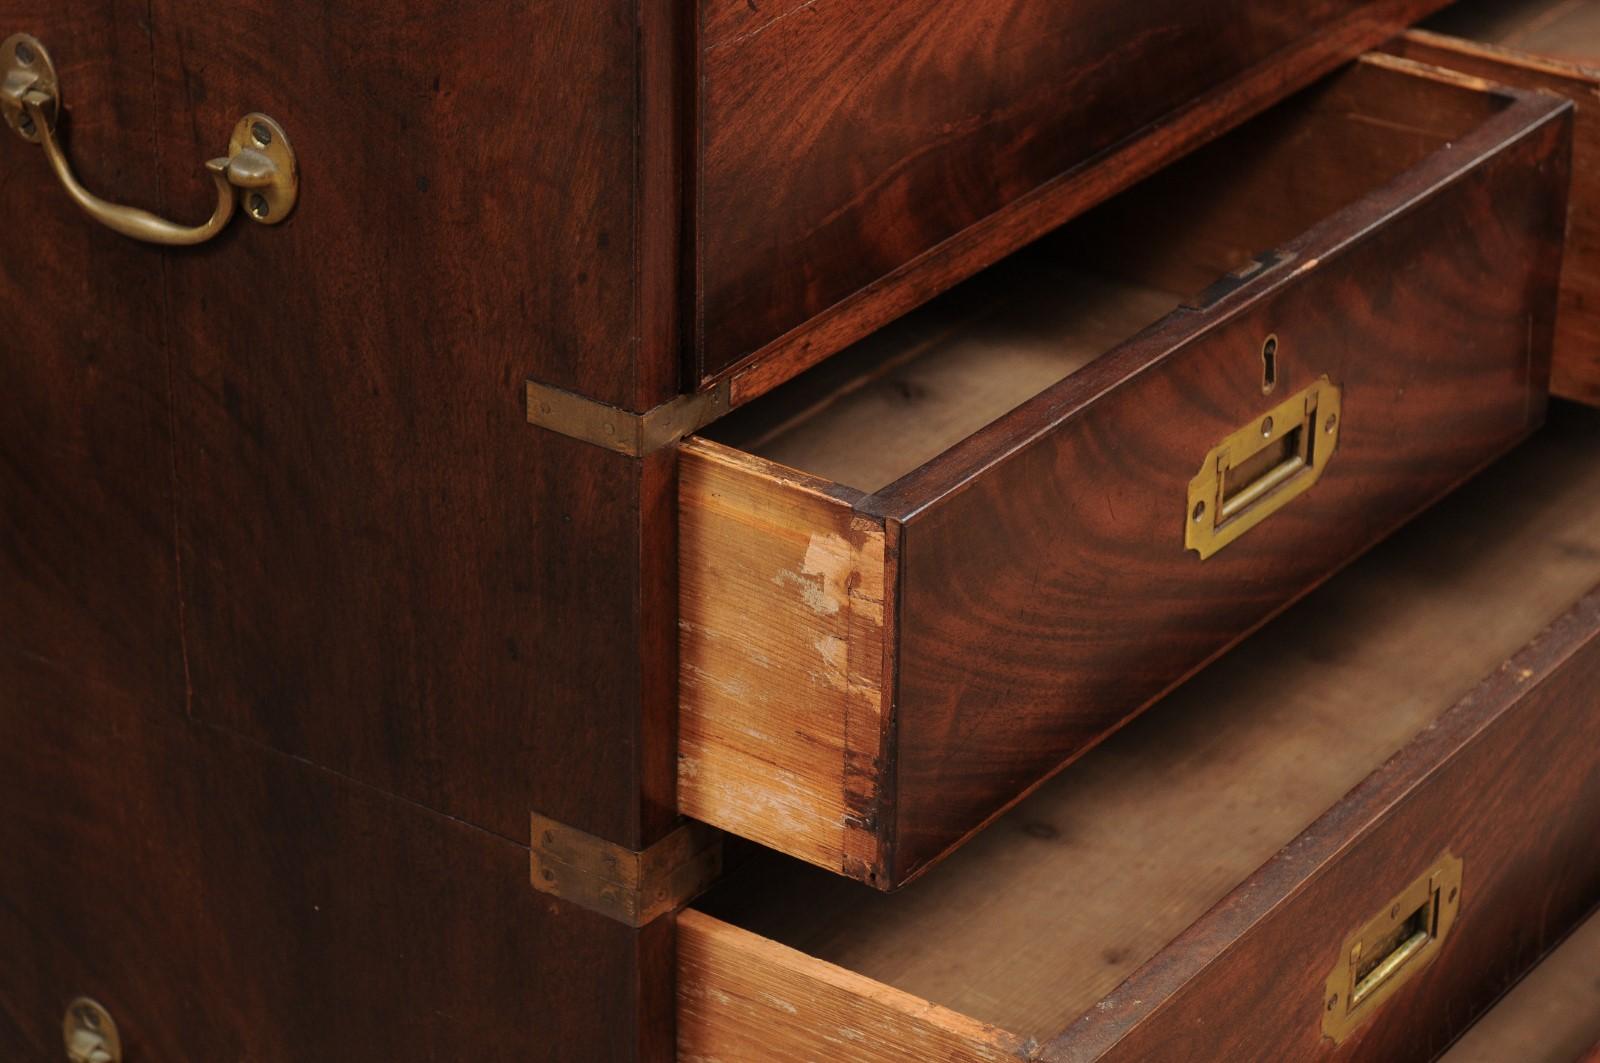 The 19th century English mahogany Campaign style chest with secretary drawer above four drawers with brass pulls, brass handles and banding on the sides. All resting on bracket feet.













    